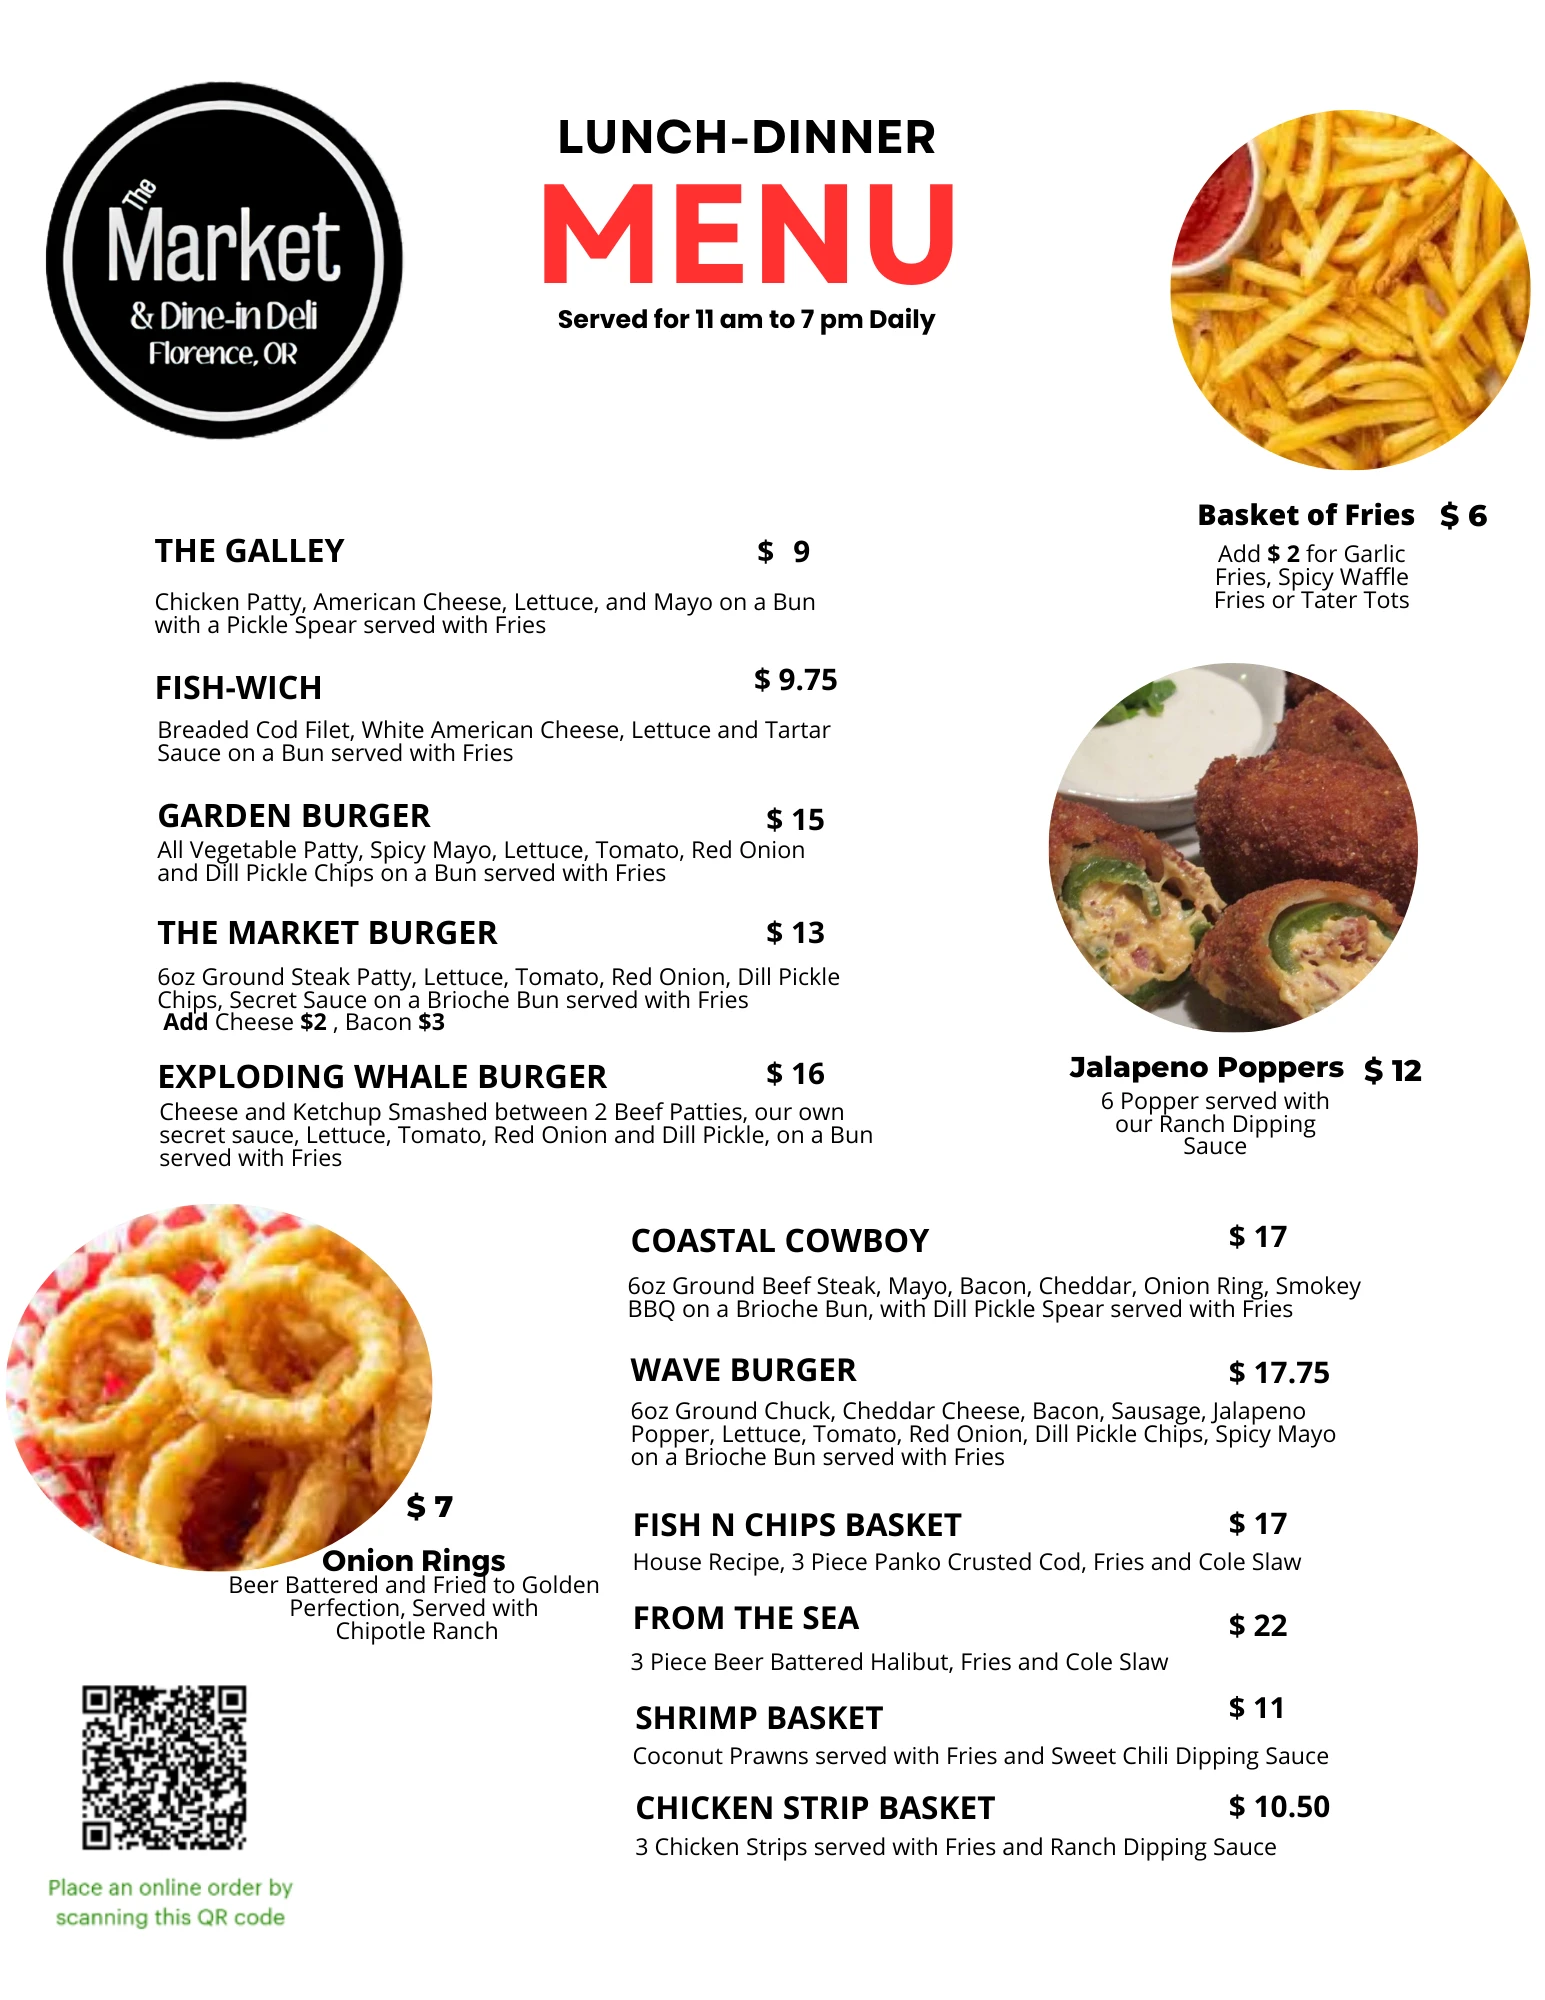 An image of a lunch and dinner menu featuring items like burgers, fries, fish-wich, chicken strips, and appetizers such as onion rings and jalapeño poppers.